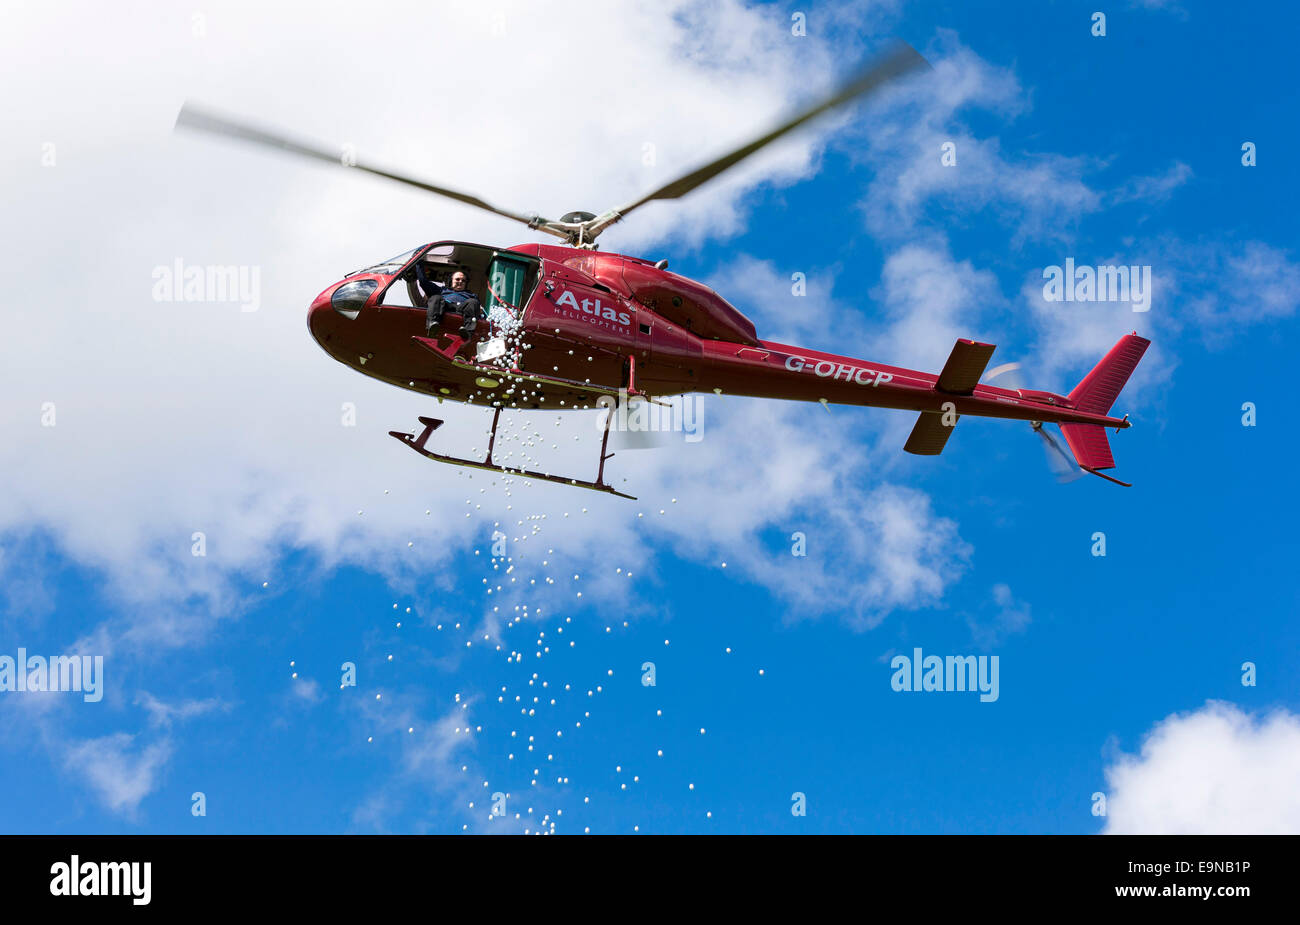 Captain Mike Burns of Atlas Helicopters and colleague Roy Adams drop 1,000 golf balls from their Squirrel helicopter flying at 9 Stock Photo